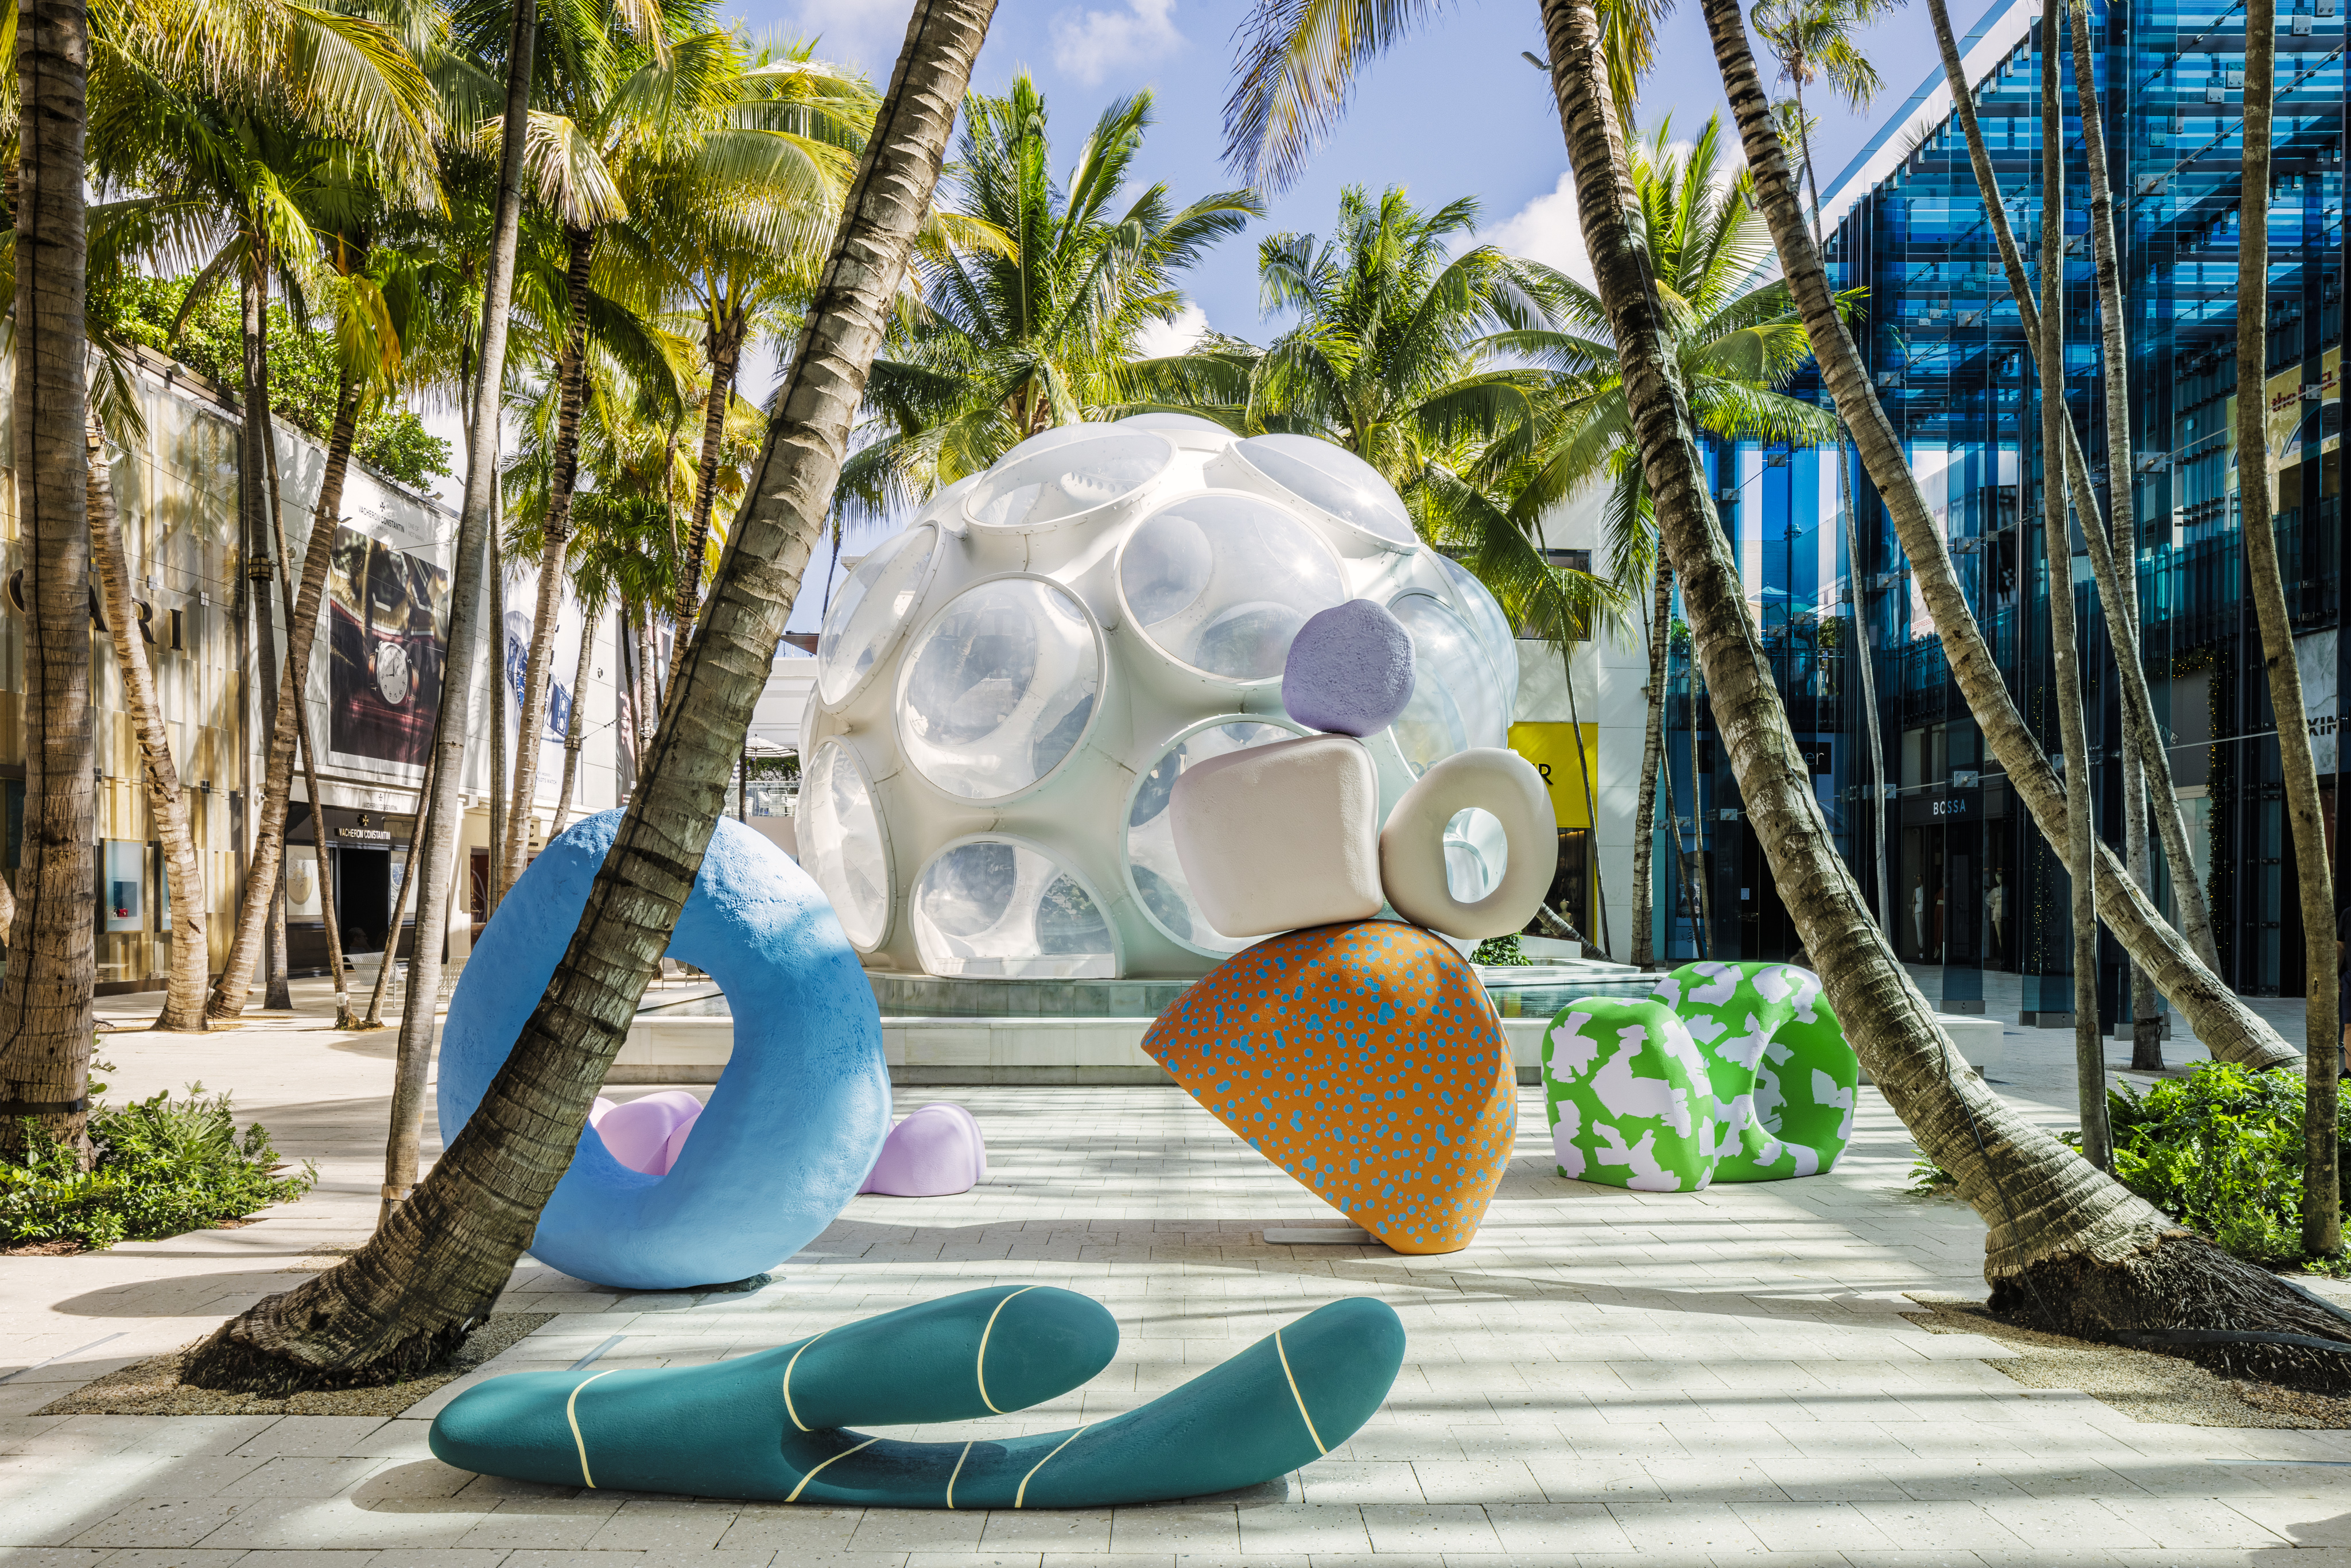 The Insider Guide To The Miami Design District During 2021 Miami Art Week